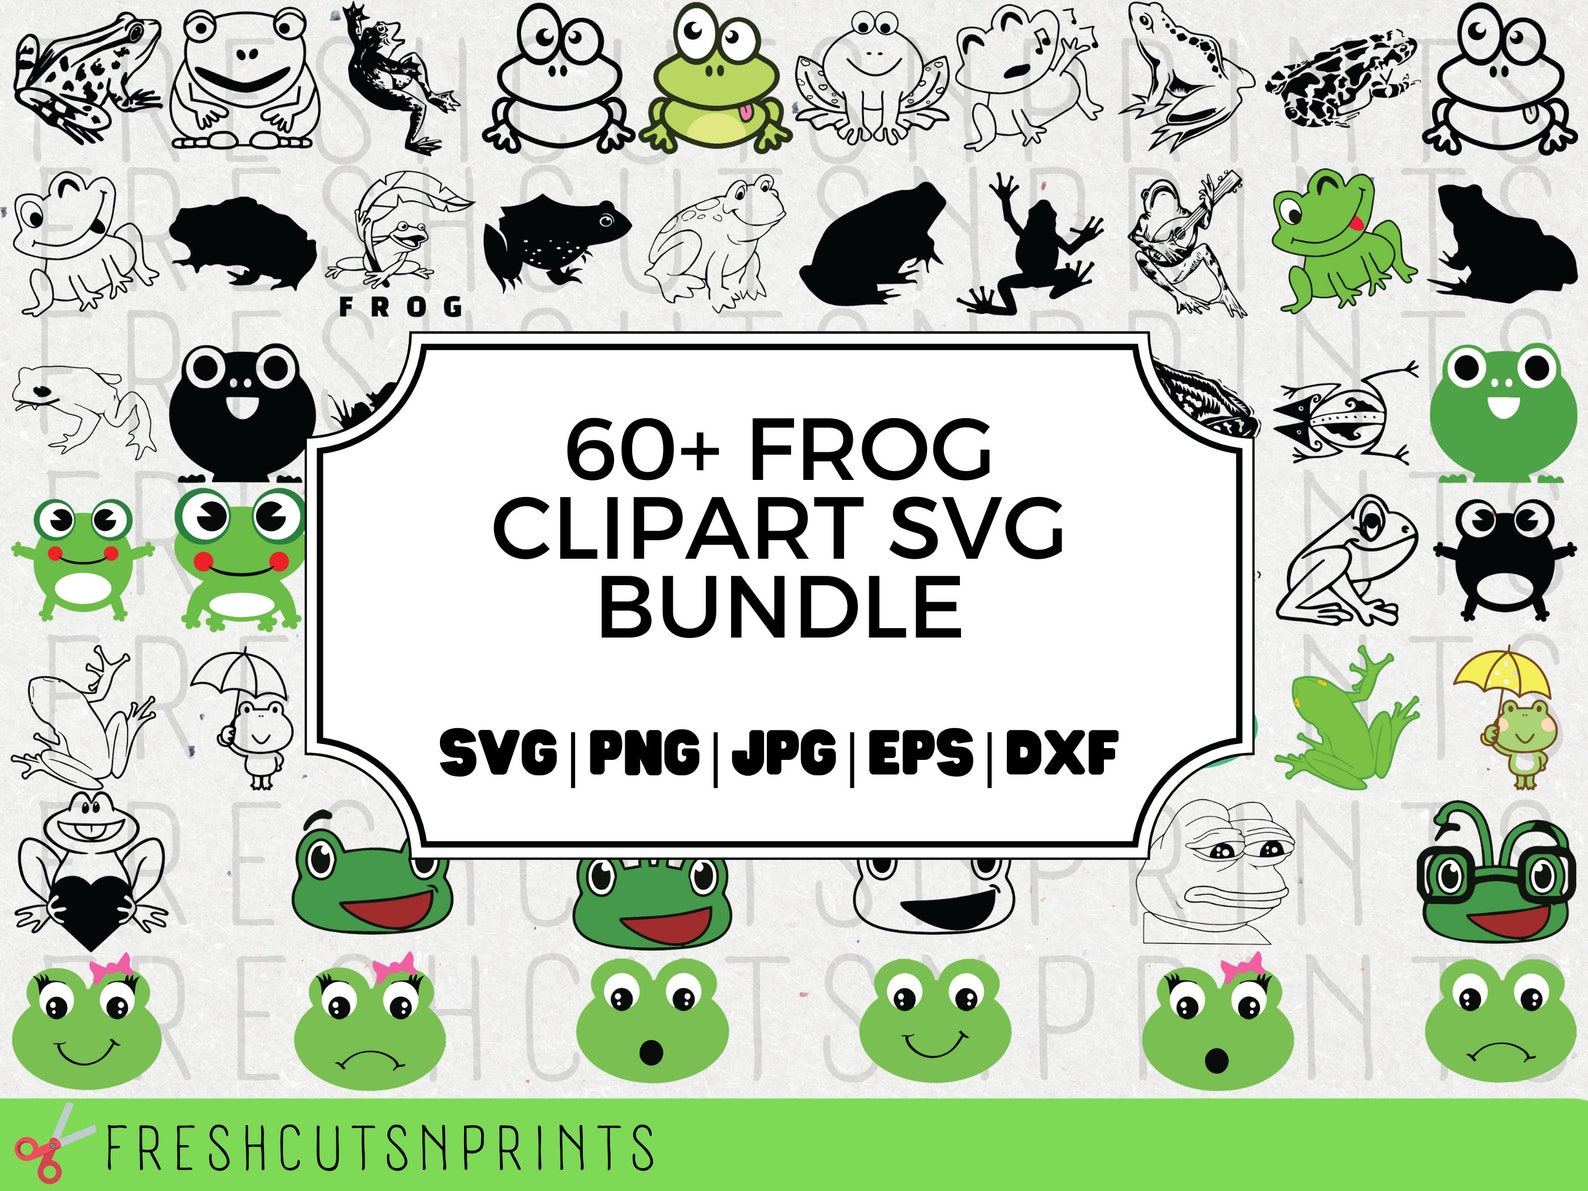 Frog clipart svg bundle with frogs and frogs.